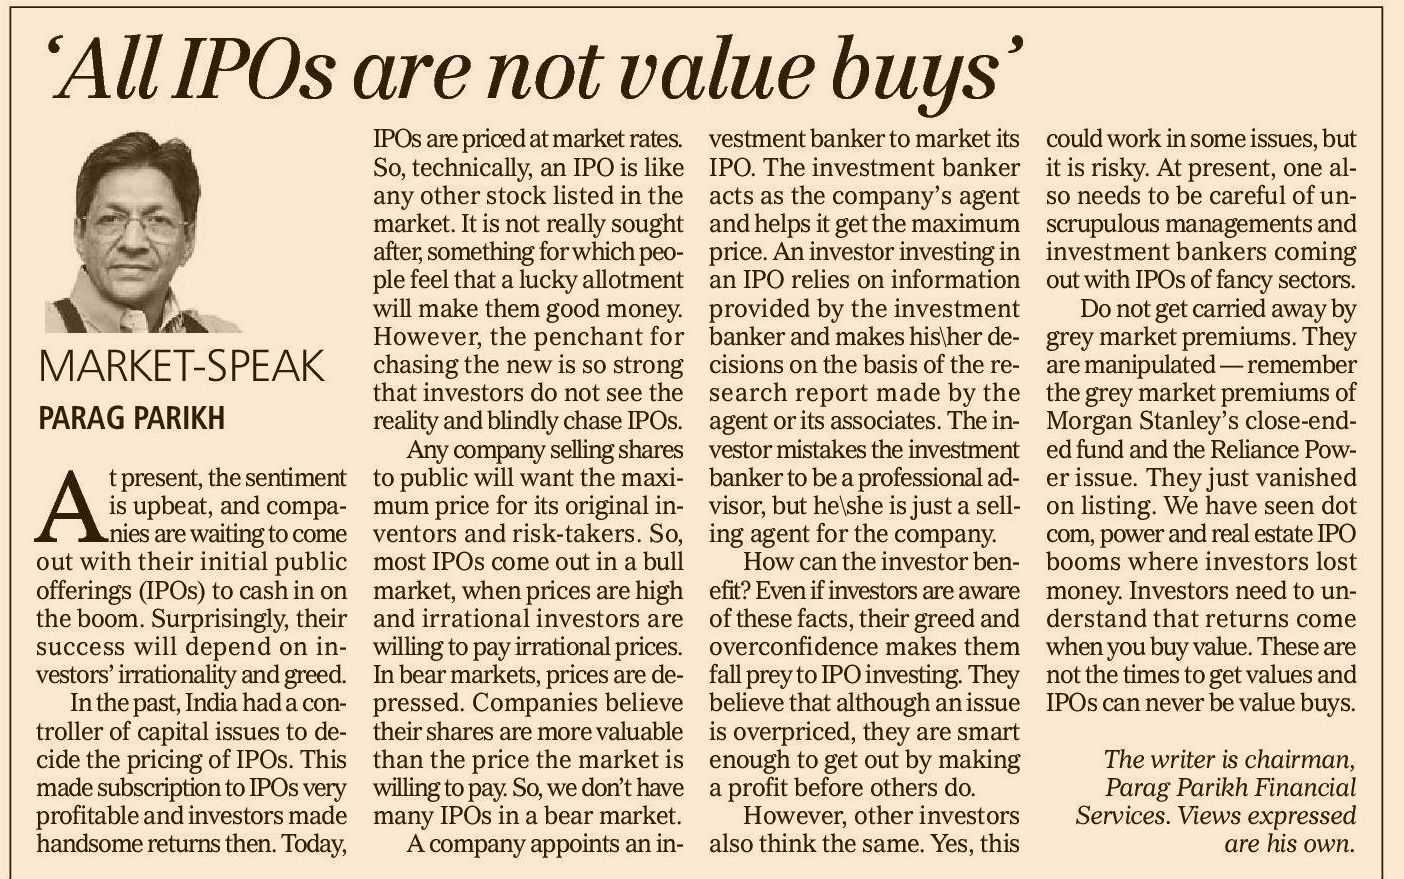 All IPOs are not value buys: Mr. Parag Parikh